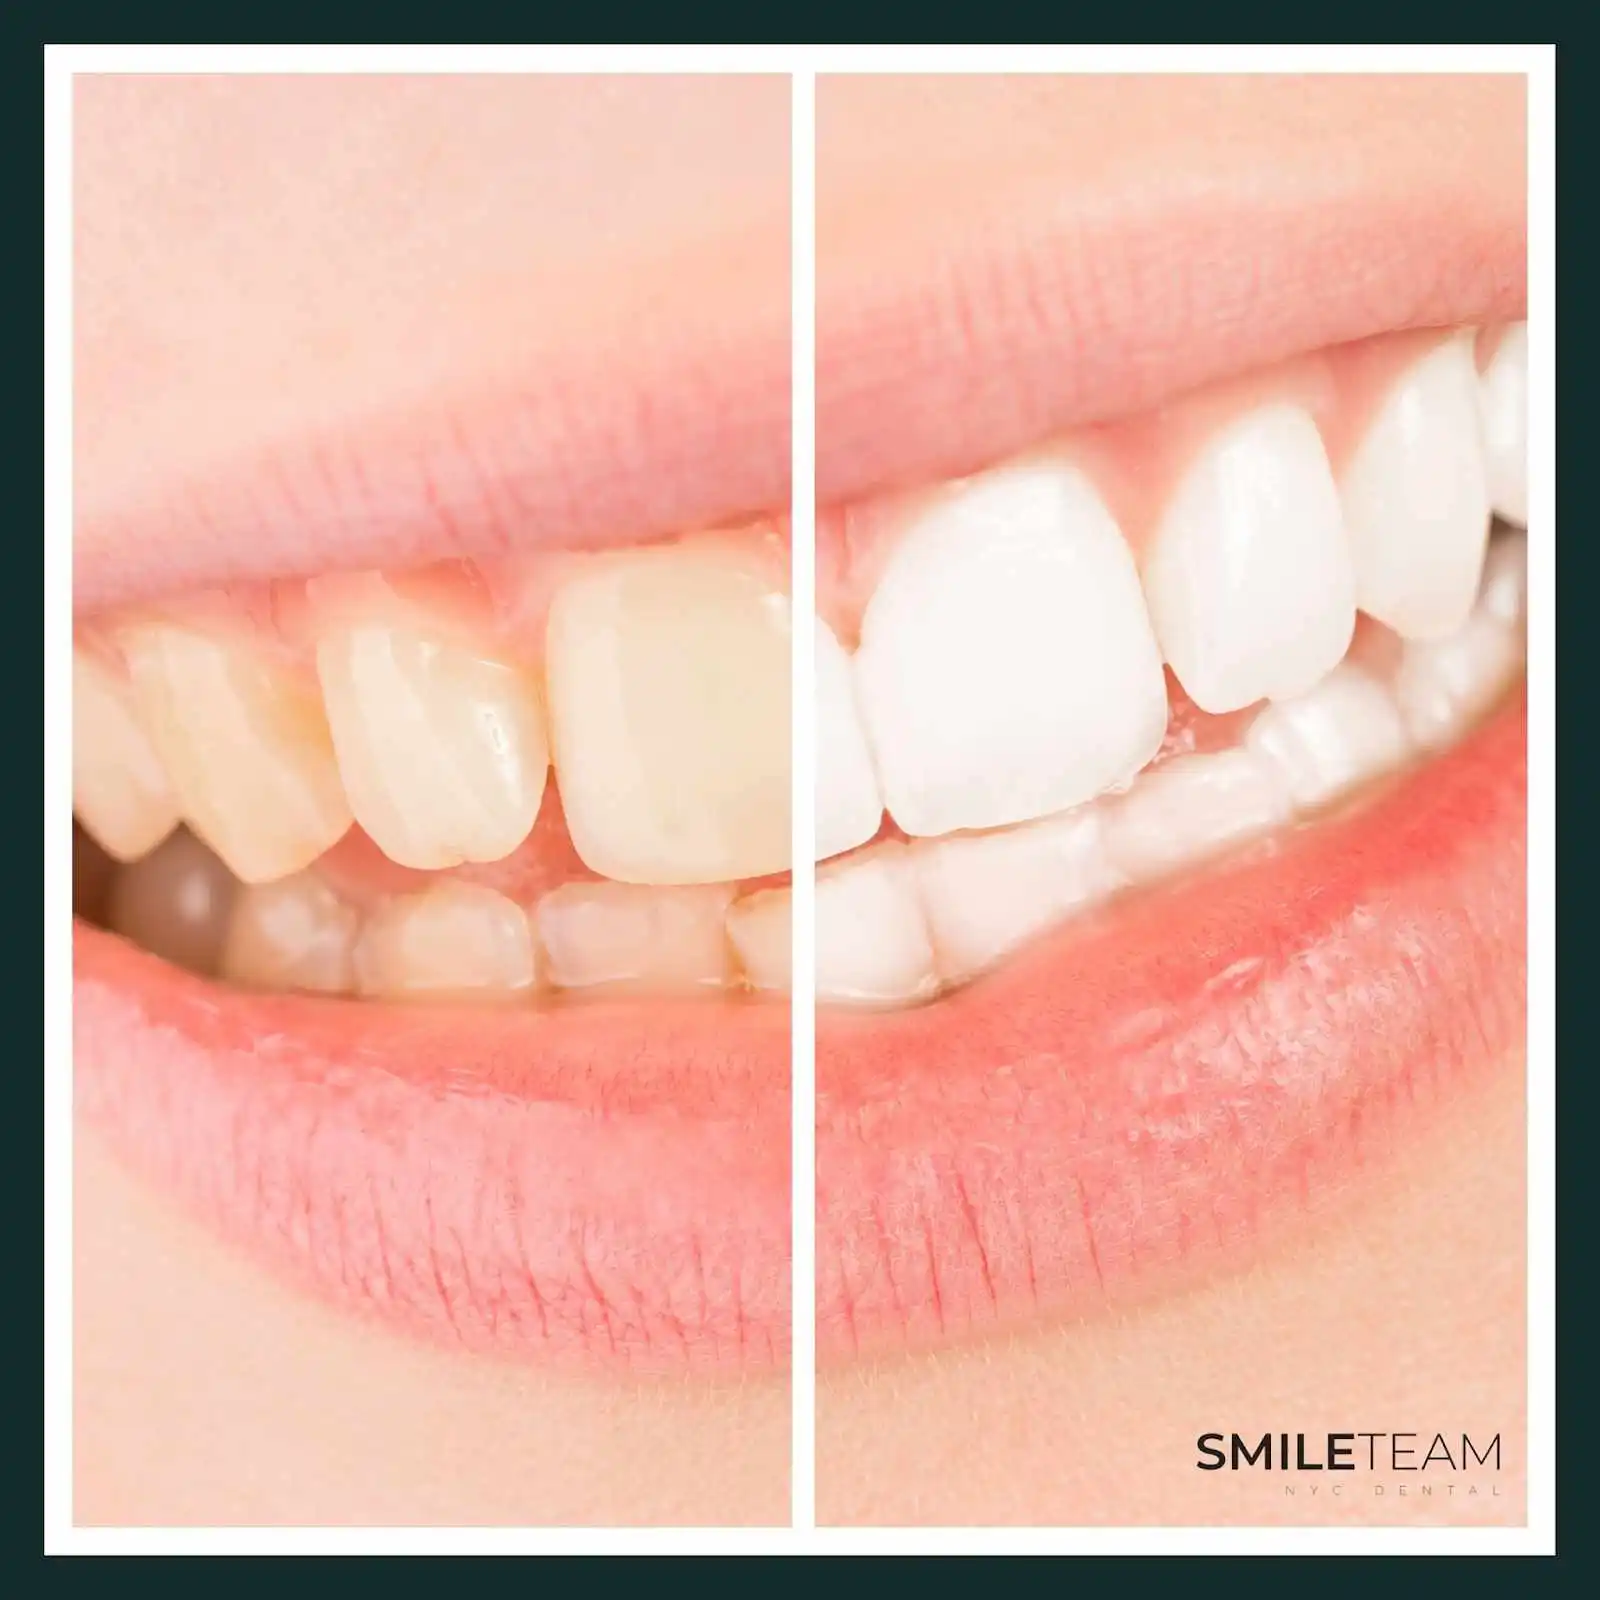 Are Your Teeth Ready for Teeth Whitening Treatment